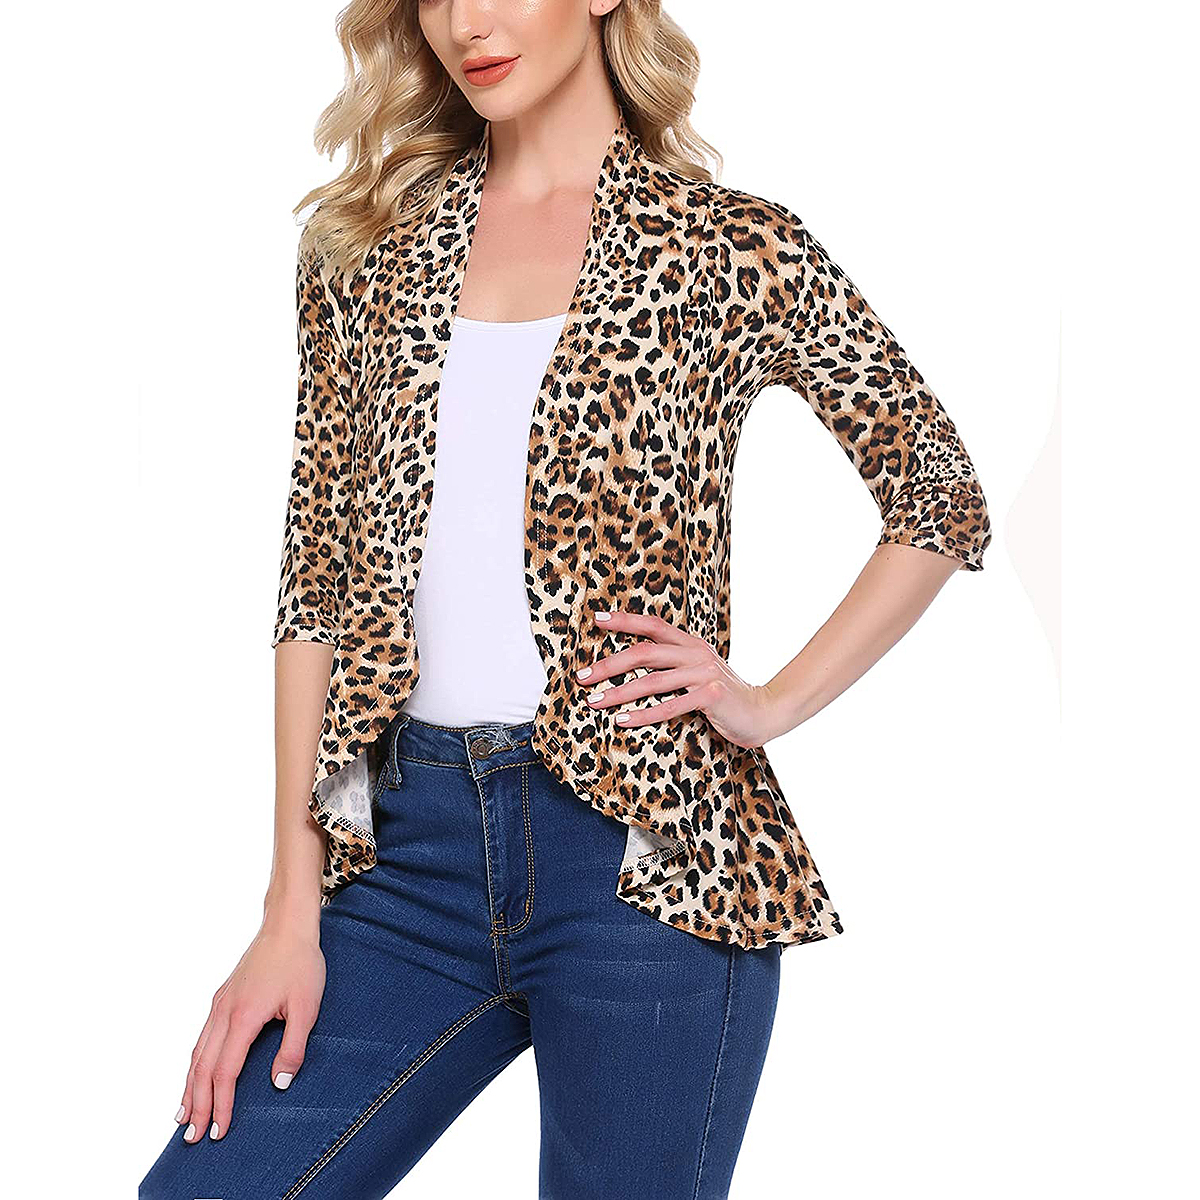 Zeagoo Leopard Cardigan Will Give Your Outfits New Life | Us Weekly